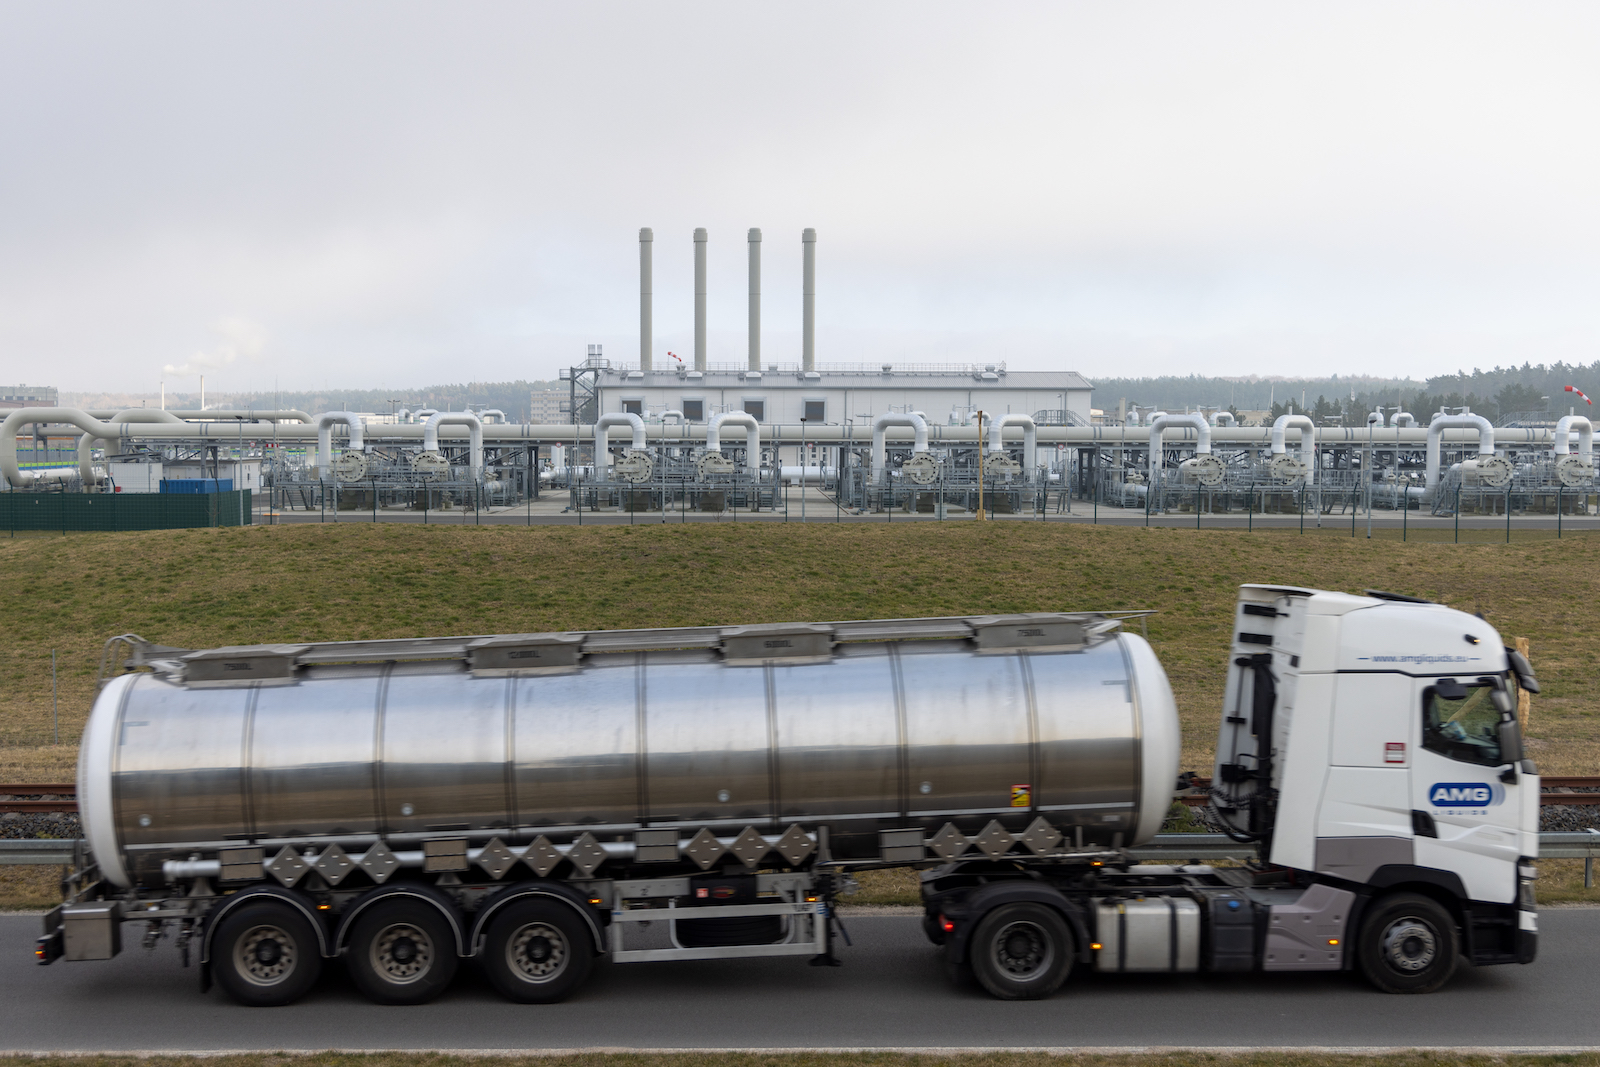 A truck drives past the receiving station for the controversial Nord Stream 2 gas pipeline on March 9, 2022 near Lubmin, Germany.